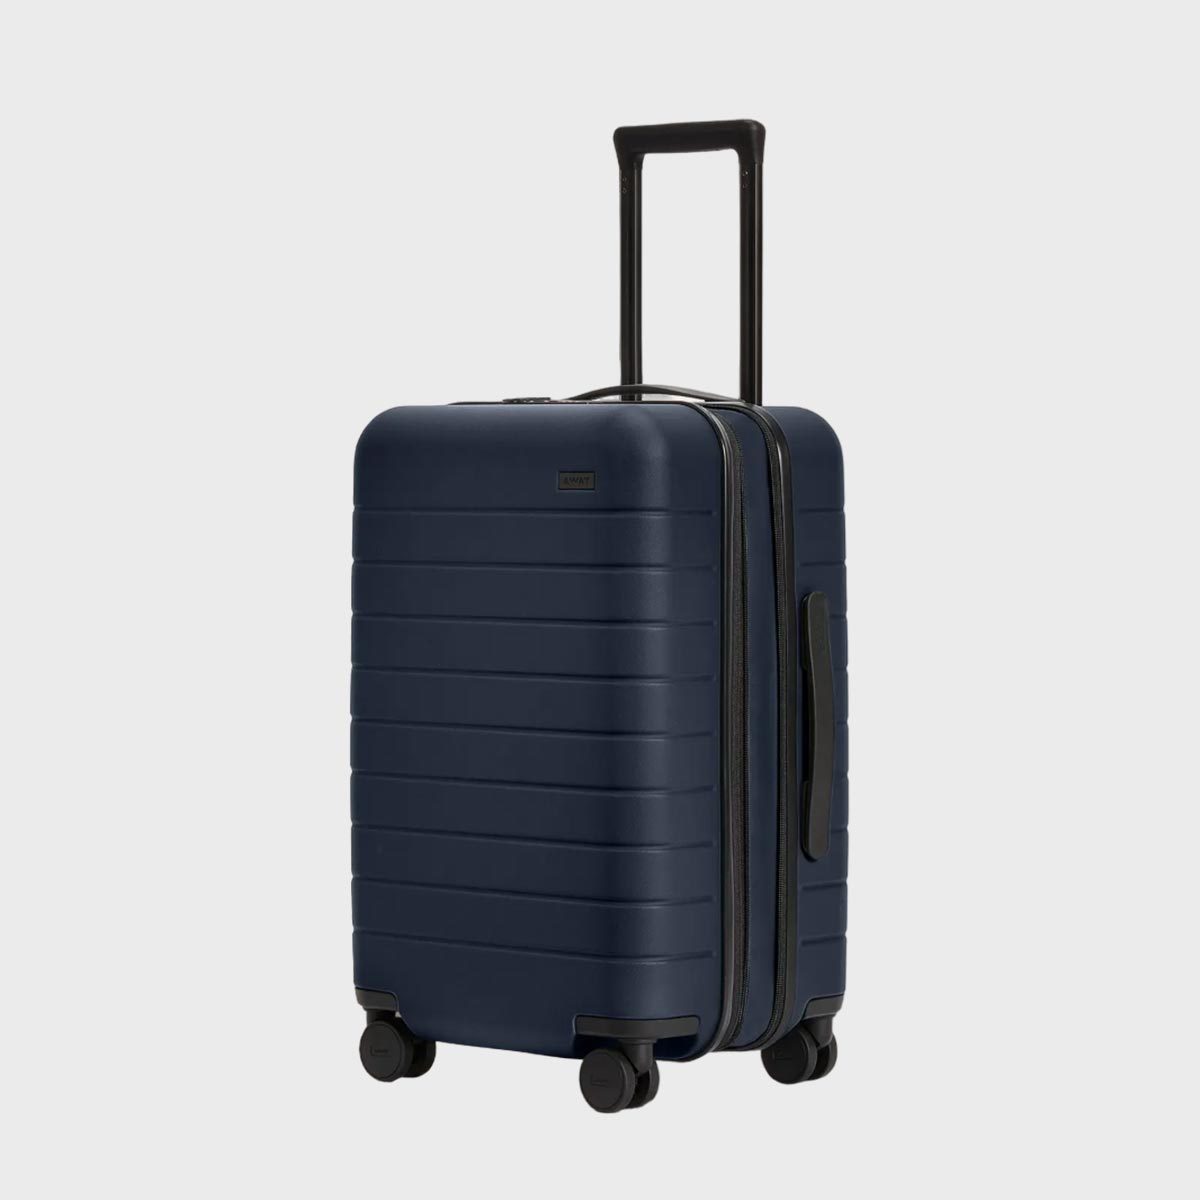 A Must-Have Flex Suitcase From Away | Trusted Since 1922